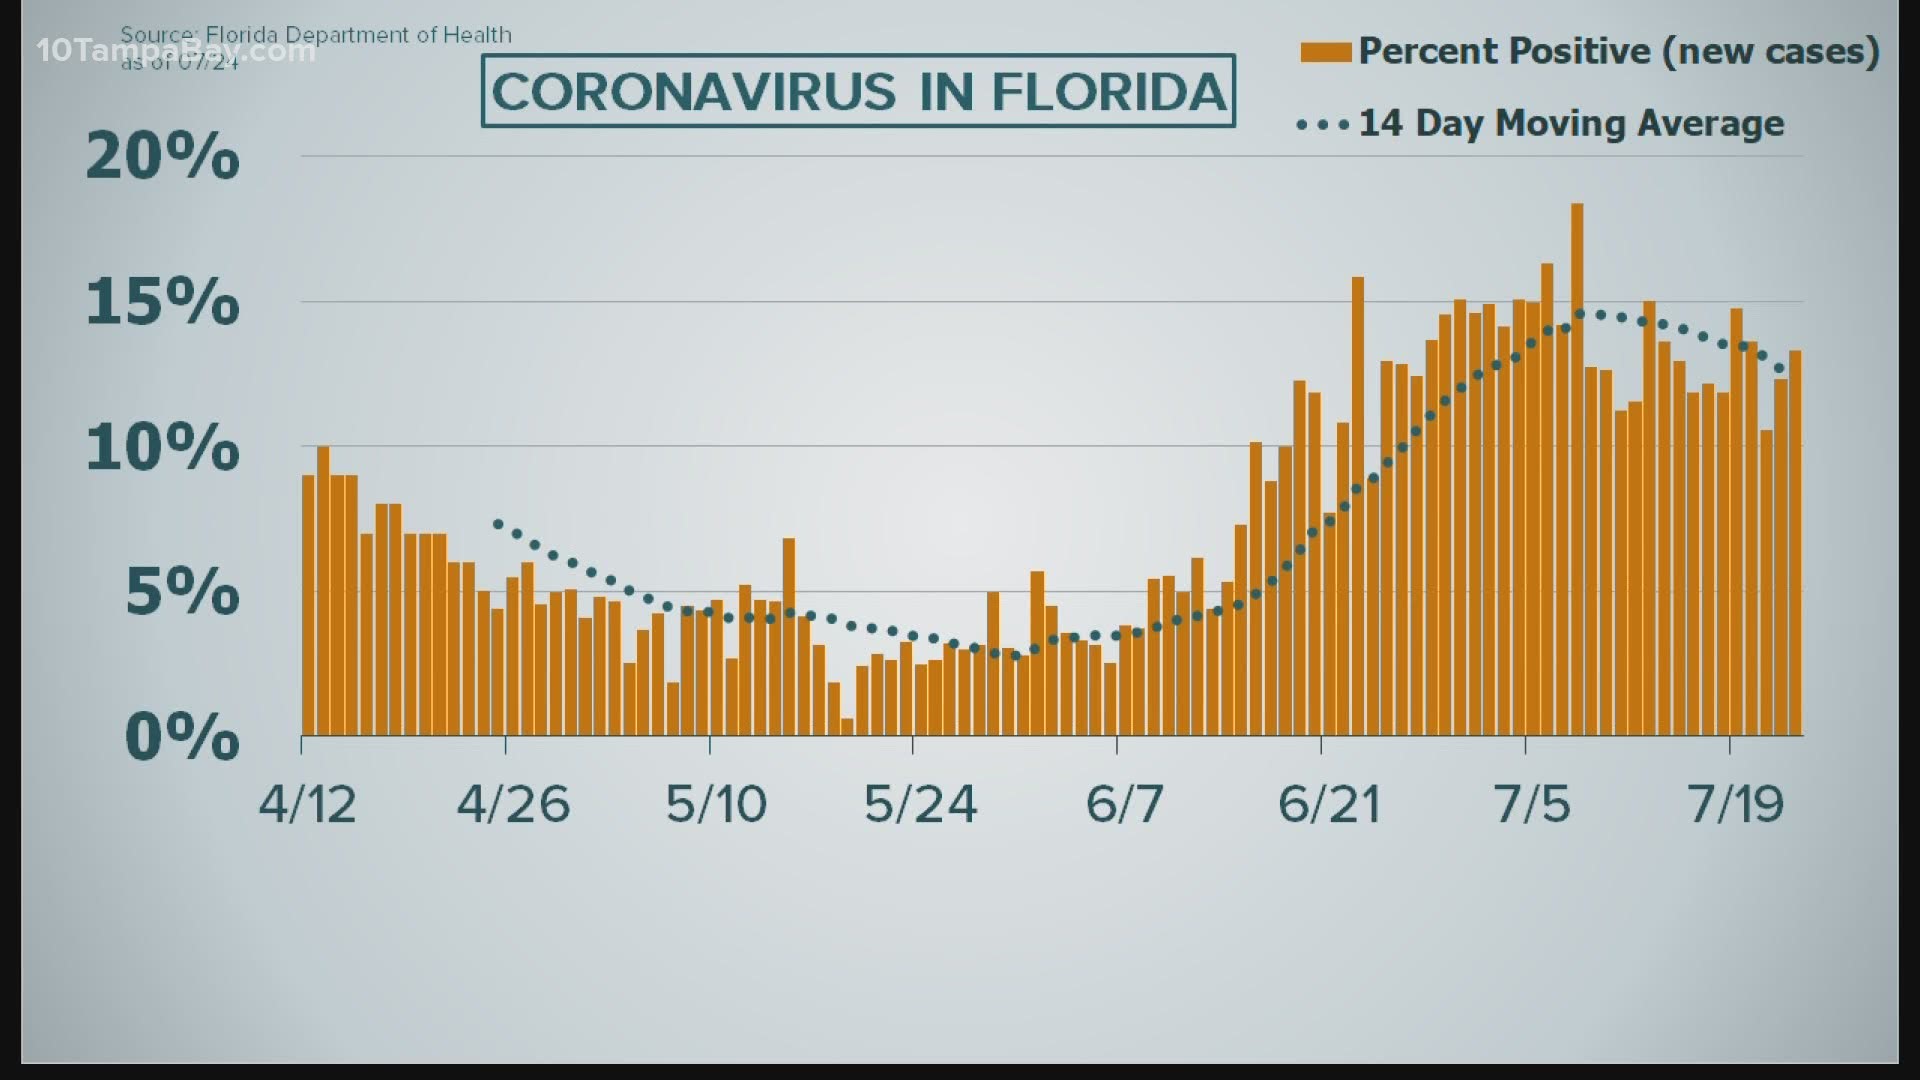 New data released by the Florida Department of Health shows the state recorded another 12,444 new cases of COVID-19 on July 23.